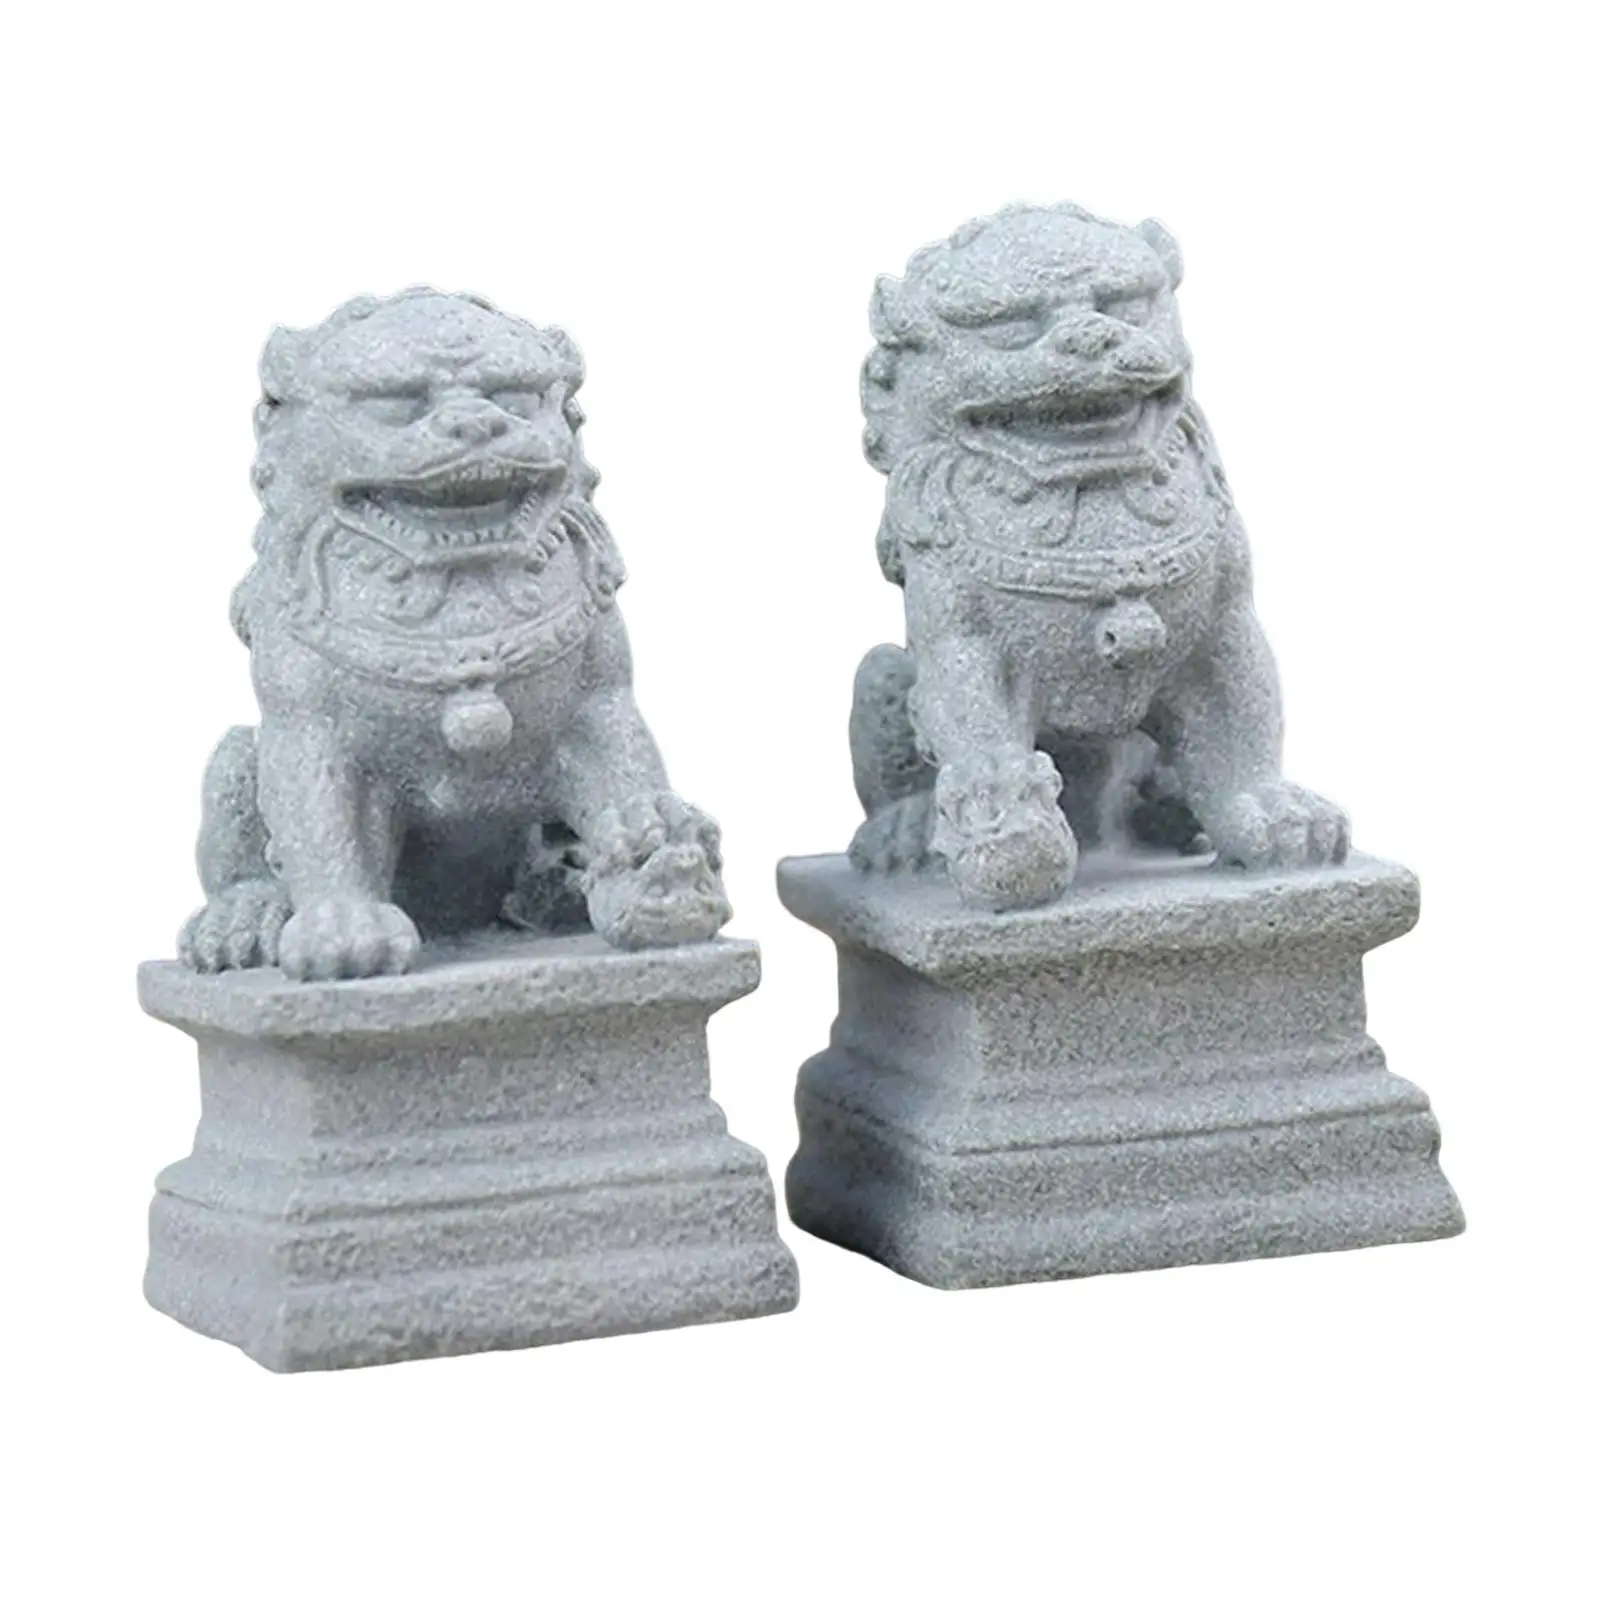 2Pcs Asian Style Lions Statues Garden Sculptures Home Decoration Ornaments for Balcony Lawn Pathway Yard Patio